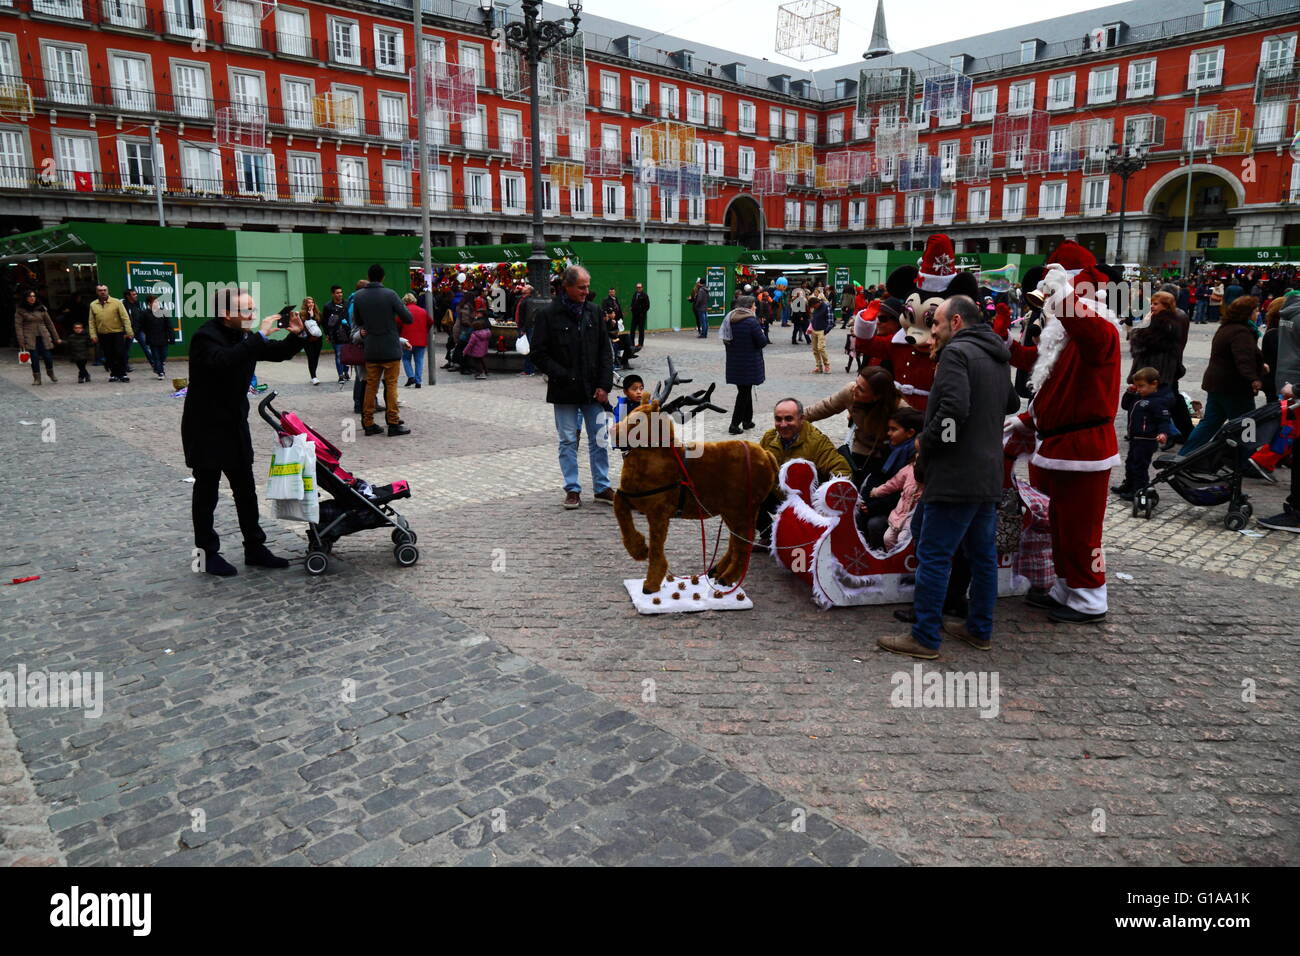 Family have their photo taken with Santa, sleigh and reindeer in Christmas market, Plaza Mayor, Madrid, Spain Stock Photo